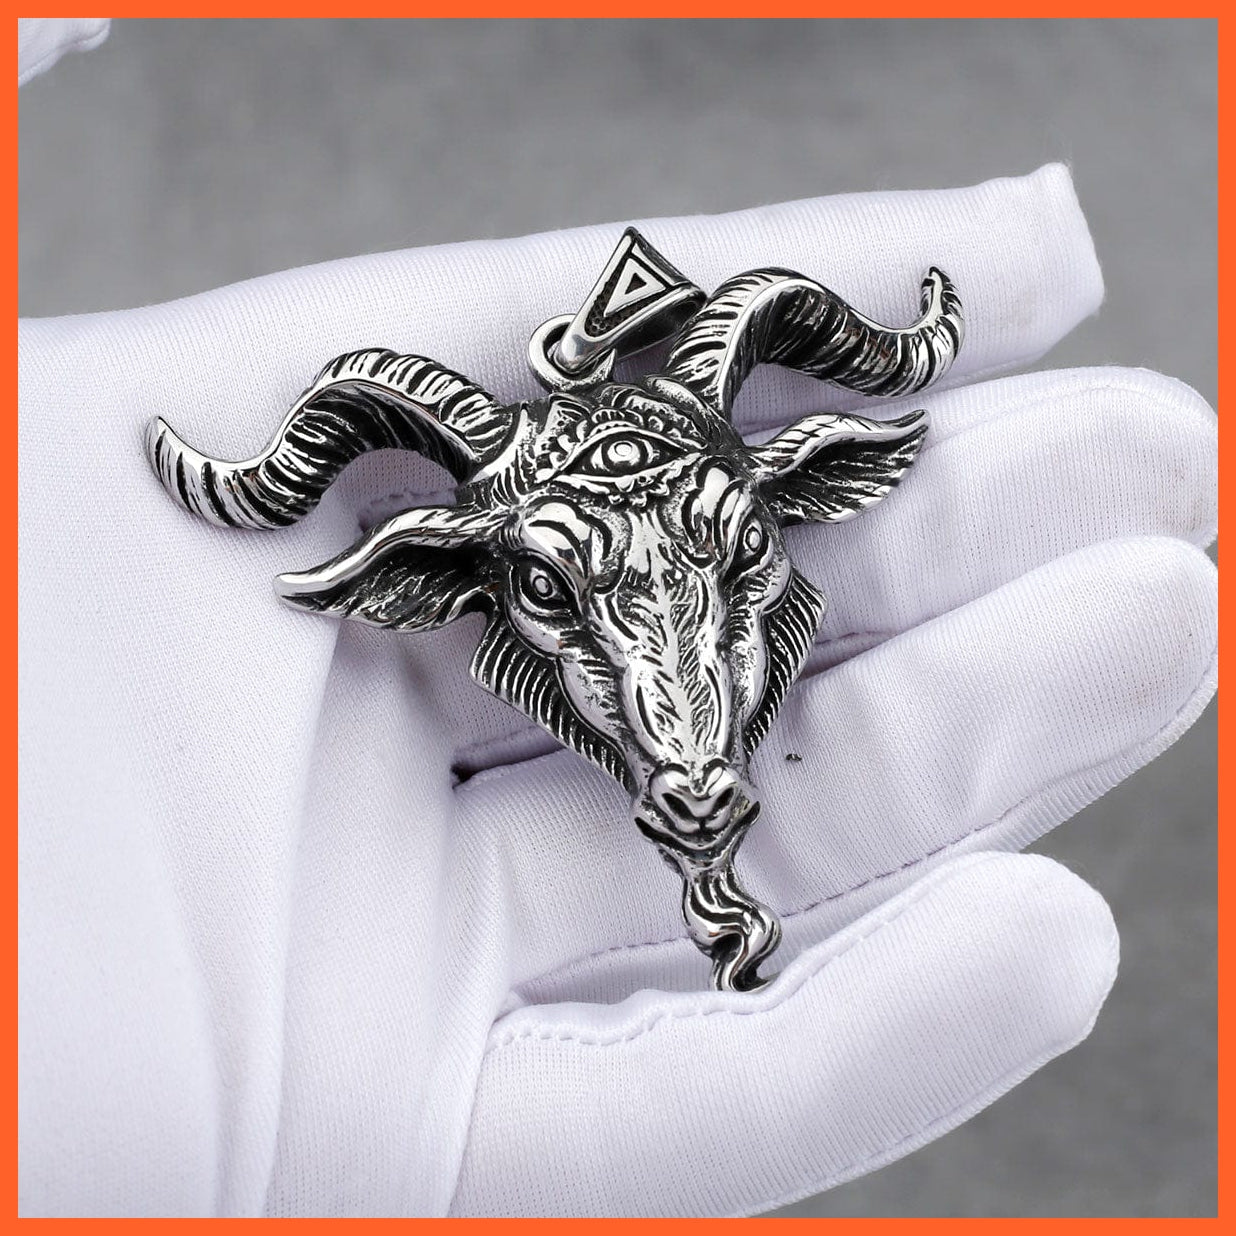 whatagift.uk chainless Stainless Steel Lucifer Satan Ram Charm Pendant Necklace